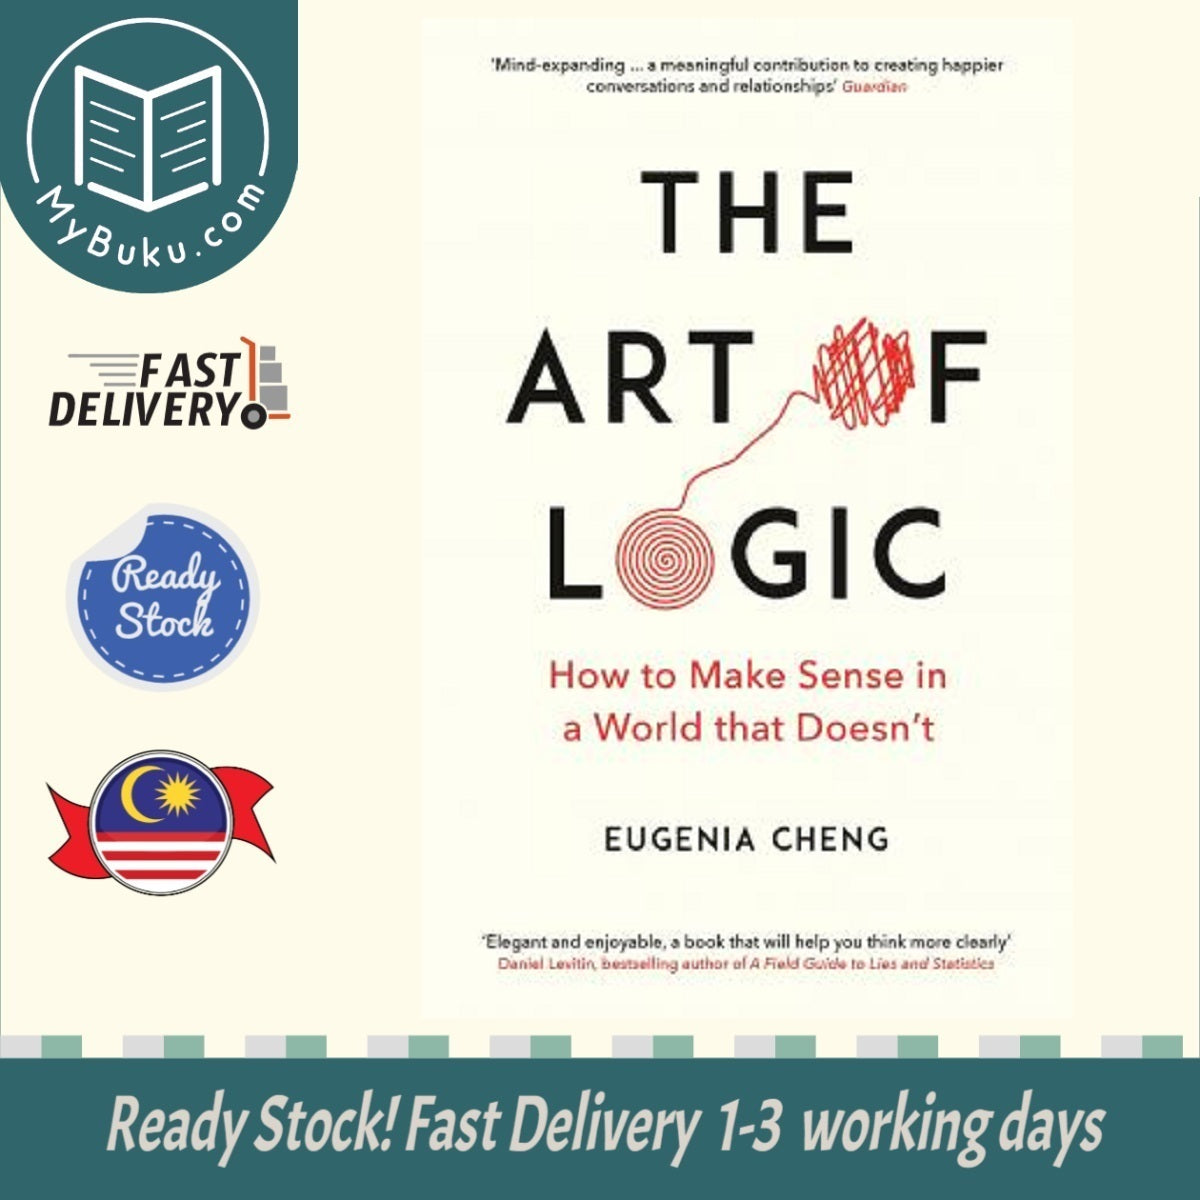 The Art of Logic: How to Make Sense in a World that Doesn't - Eugenia Cheng - 9781788160391 - Profile Books Ltd